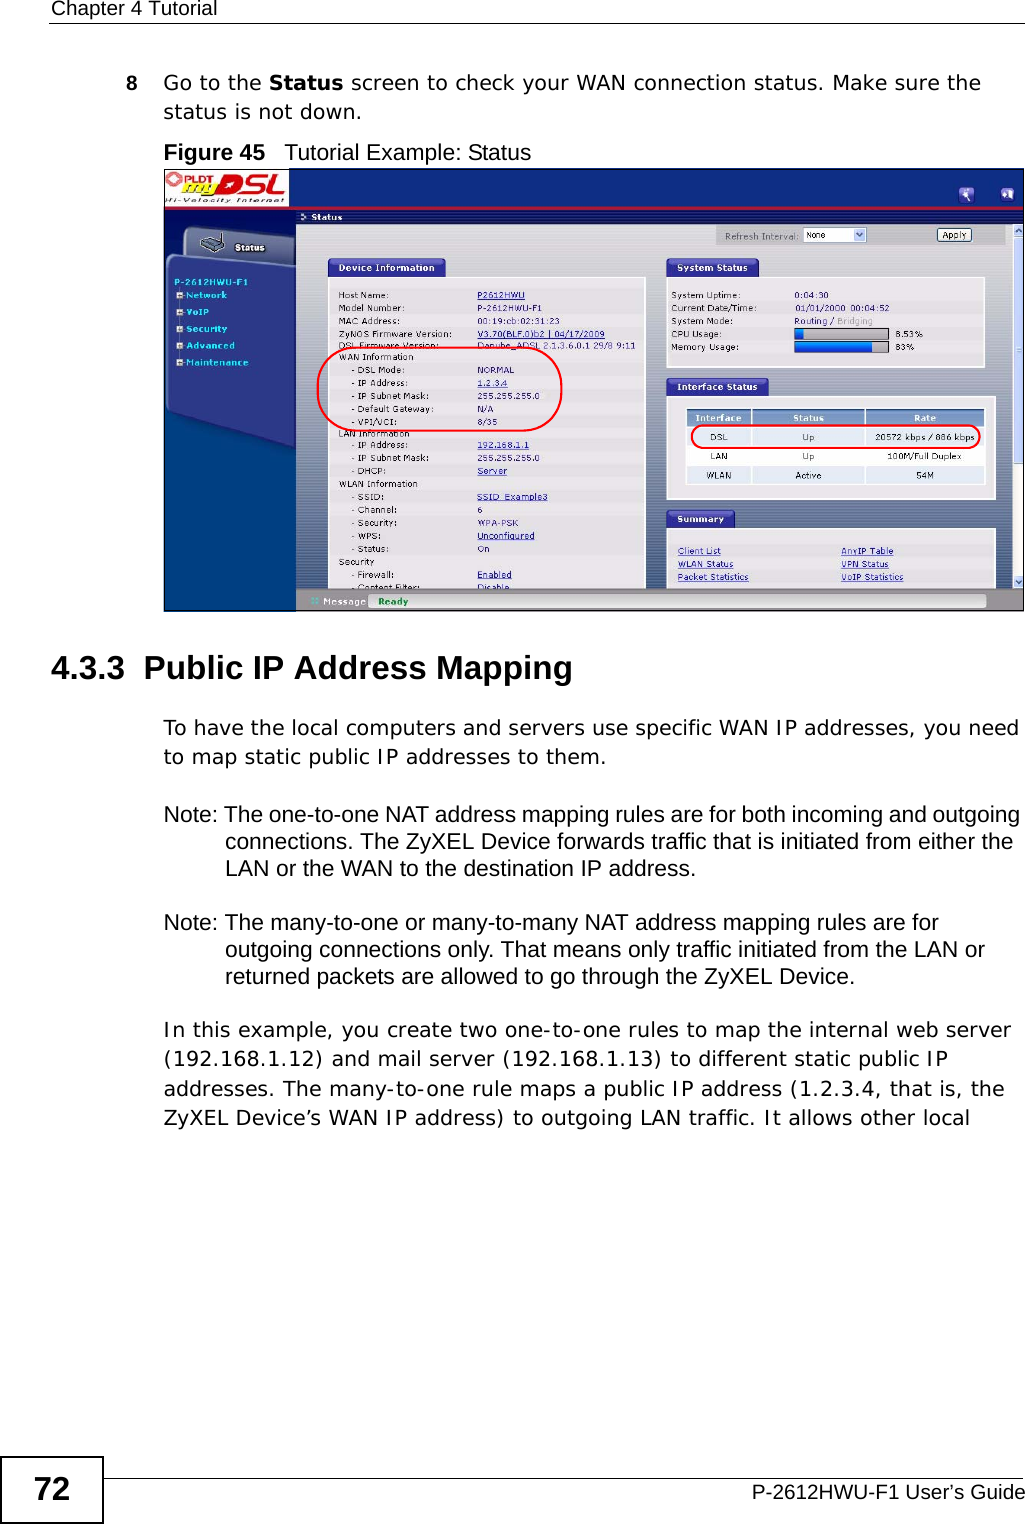 Chapter 4 TutorialP-2612HWU-F1 User’s Guide728Go to the Status screen to check your WAN connection status. Make sure the status is not down.Figure 45   Tutorial Example: Status4.3.3  Public IP Address MappingTo have the local computers and servers use specific WAN IP addresses, you need to map static public IP addresses to them.Note: The one-to-one NAT address mapping rules are for both incoming and outgoing connections. The ZyXEL Device forwards traffic that is initiated from either the LAN or the WAN to the destination IP address.Note: The many-to-one or many-to-many NAT address mapping rules are for outgoing connections only. That means only traffic initiated from the LAN or returned packets are allowed to go through the ZyXEL Device.In this example, you create two one-to-one rules to map the internal web server (192.168.1.12) and mail server (192.168.1.13) to different static public IP addresses. The many-to-one rule maps a public IP address (1.2.3.4, that is, the ZyXEL Device’s WAN IP address) to outgoing LAN traffic. It allows other local 